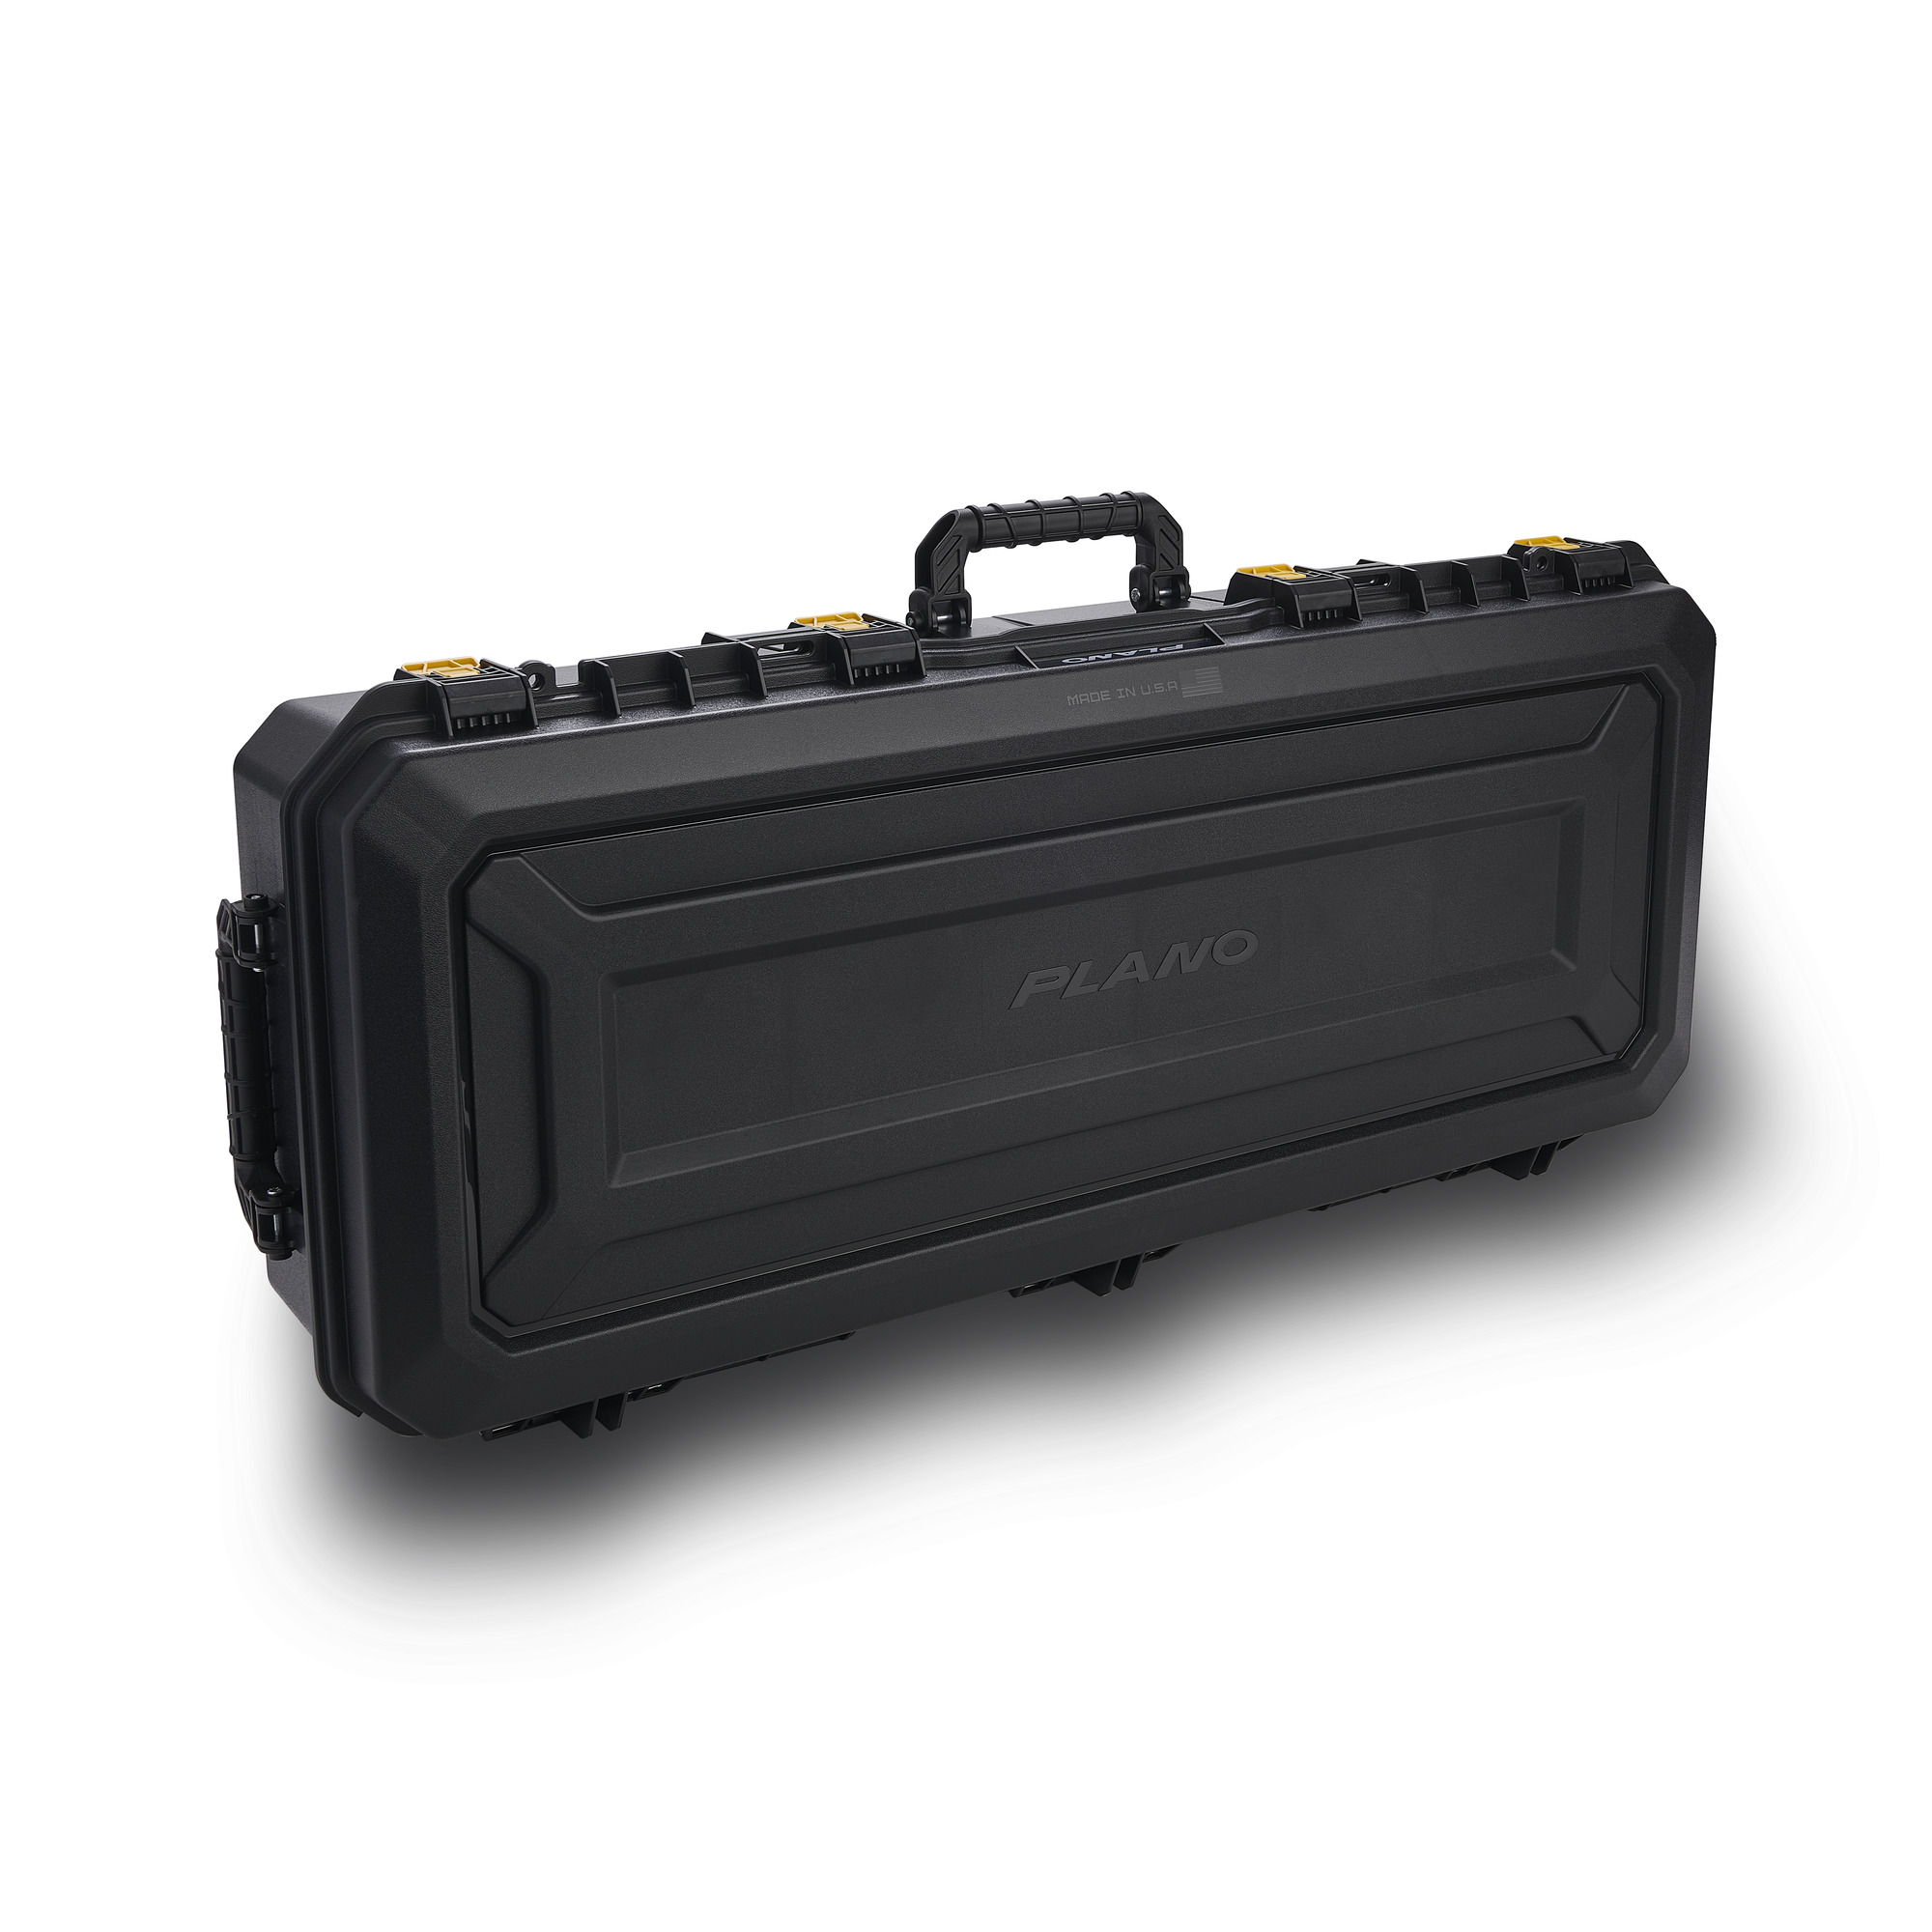 https://op2.0ps.us/original/opplanet-plano-aw-ultimate-quad-rifle-case-m